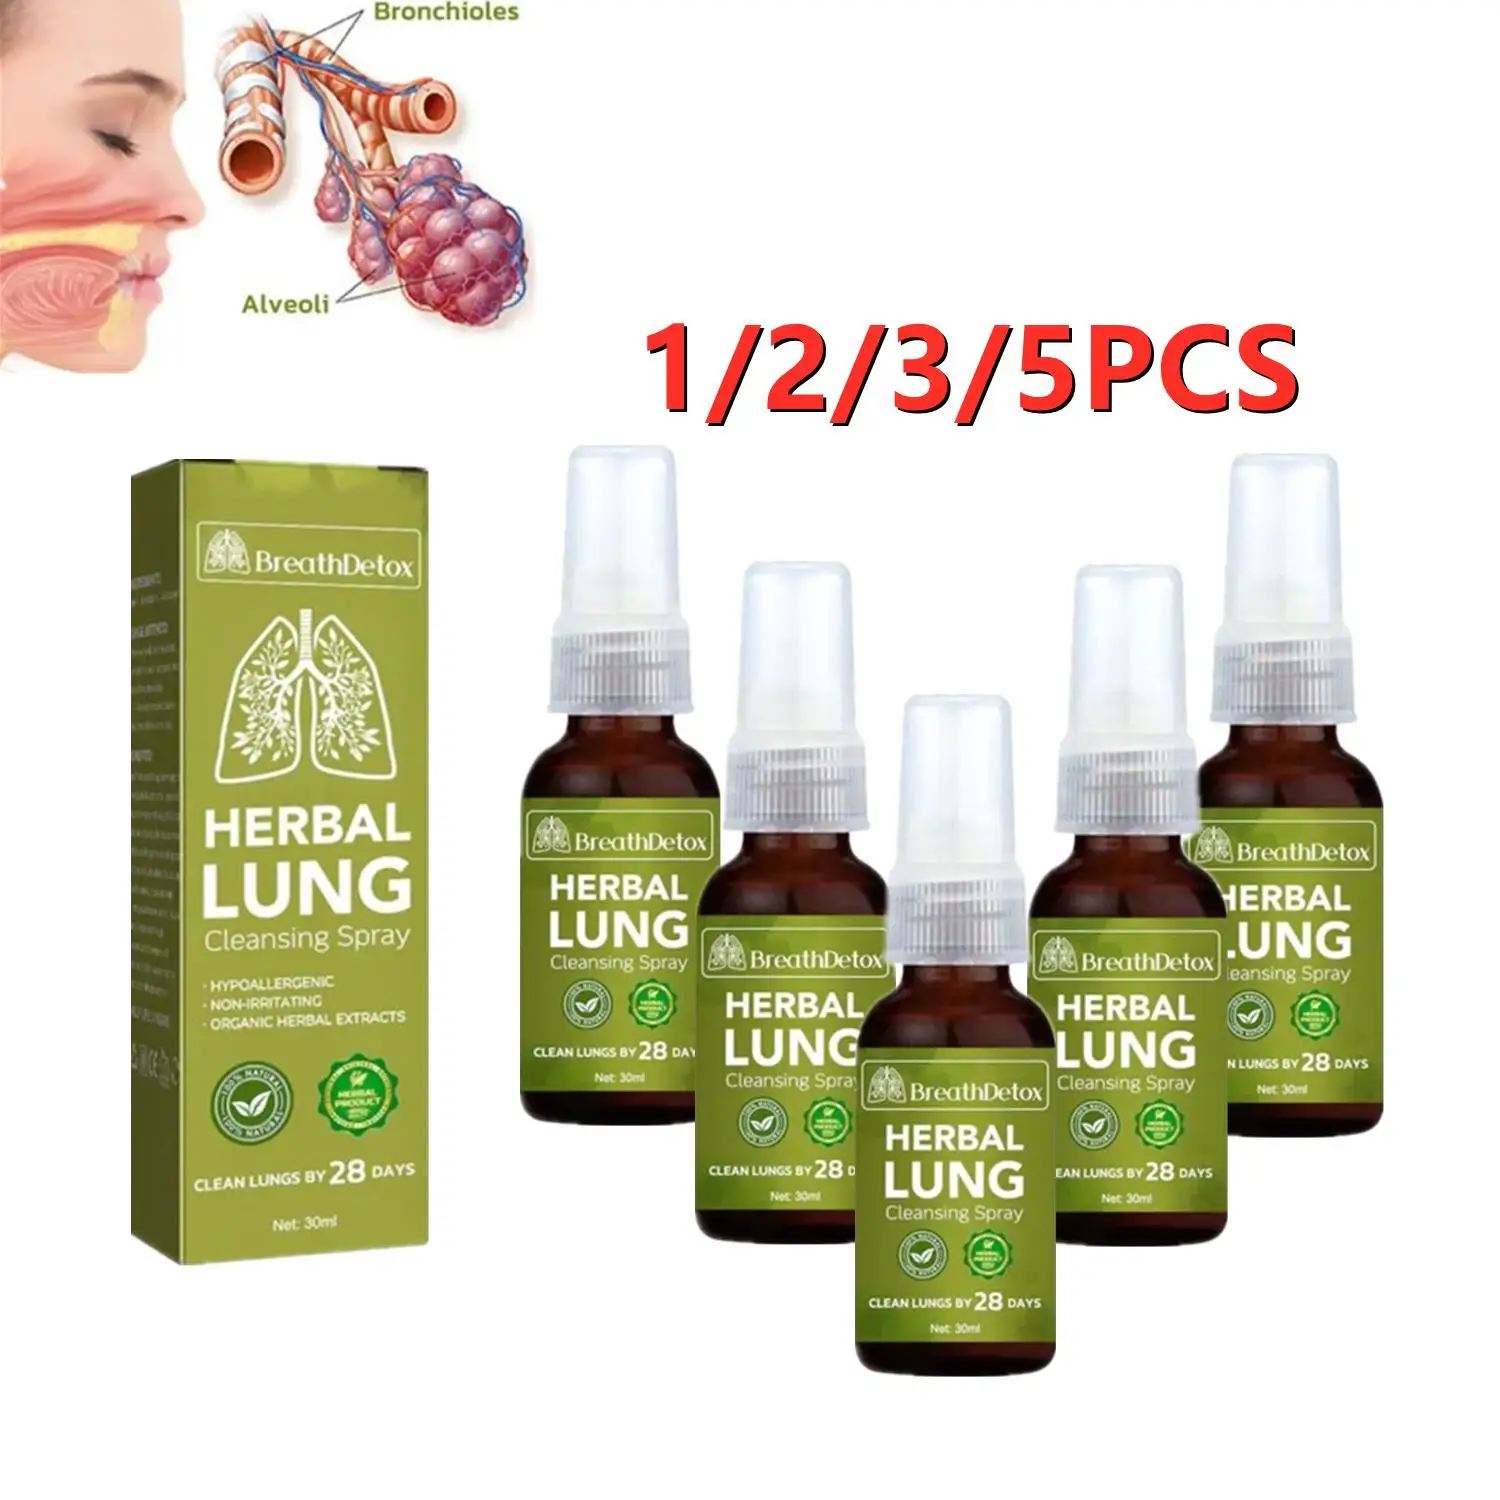 LOT Lung Herbal Cleanser Spray Smokers Clear Nasal Mist Anti Snoring Congestion Relieves Solution Clear Dry Throat Breath Spray 2pcs lung herbal cleanser spray smokers clear nasal mist anti snoring congestion relieves solution clear dry throat breath spra